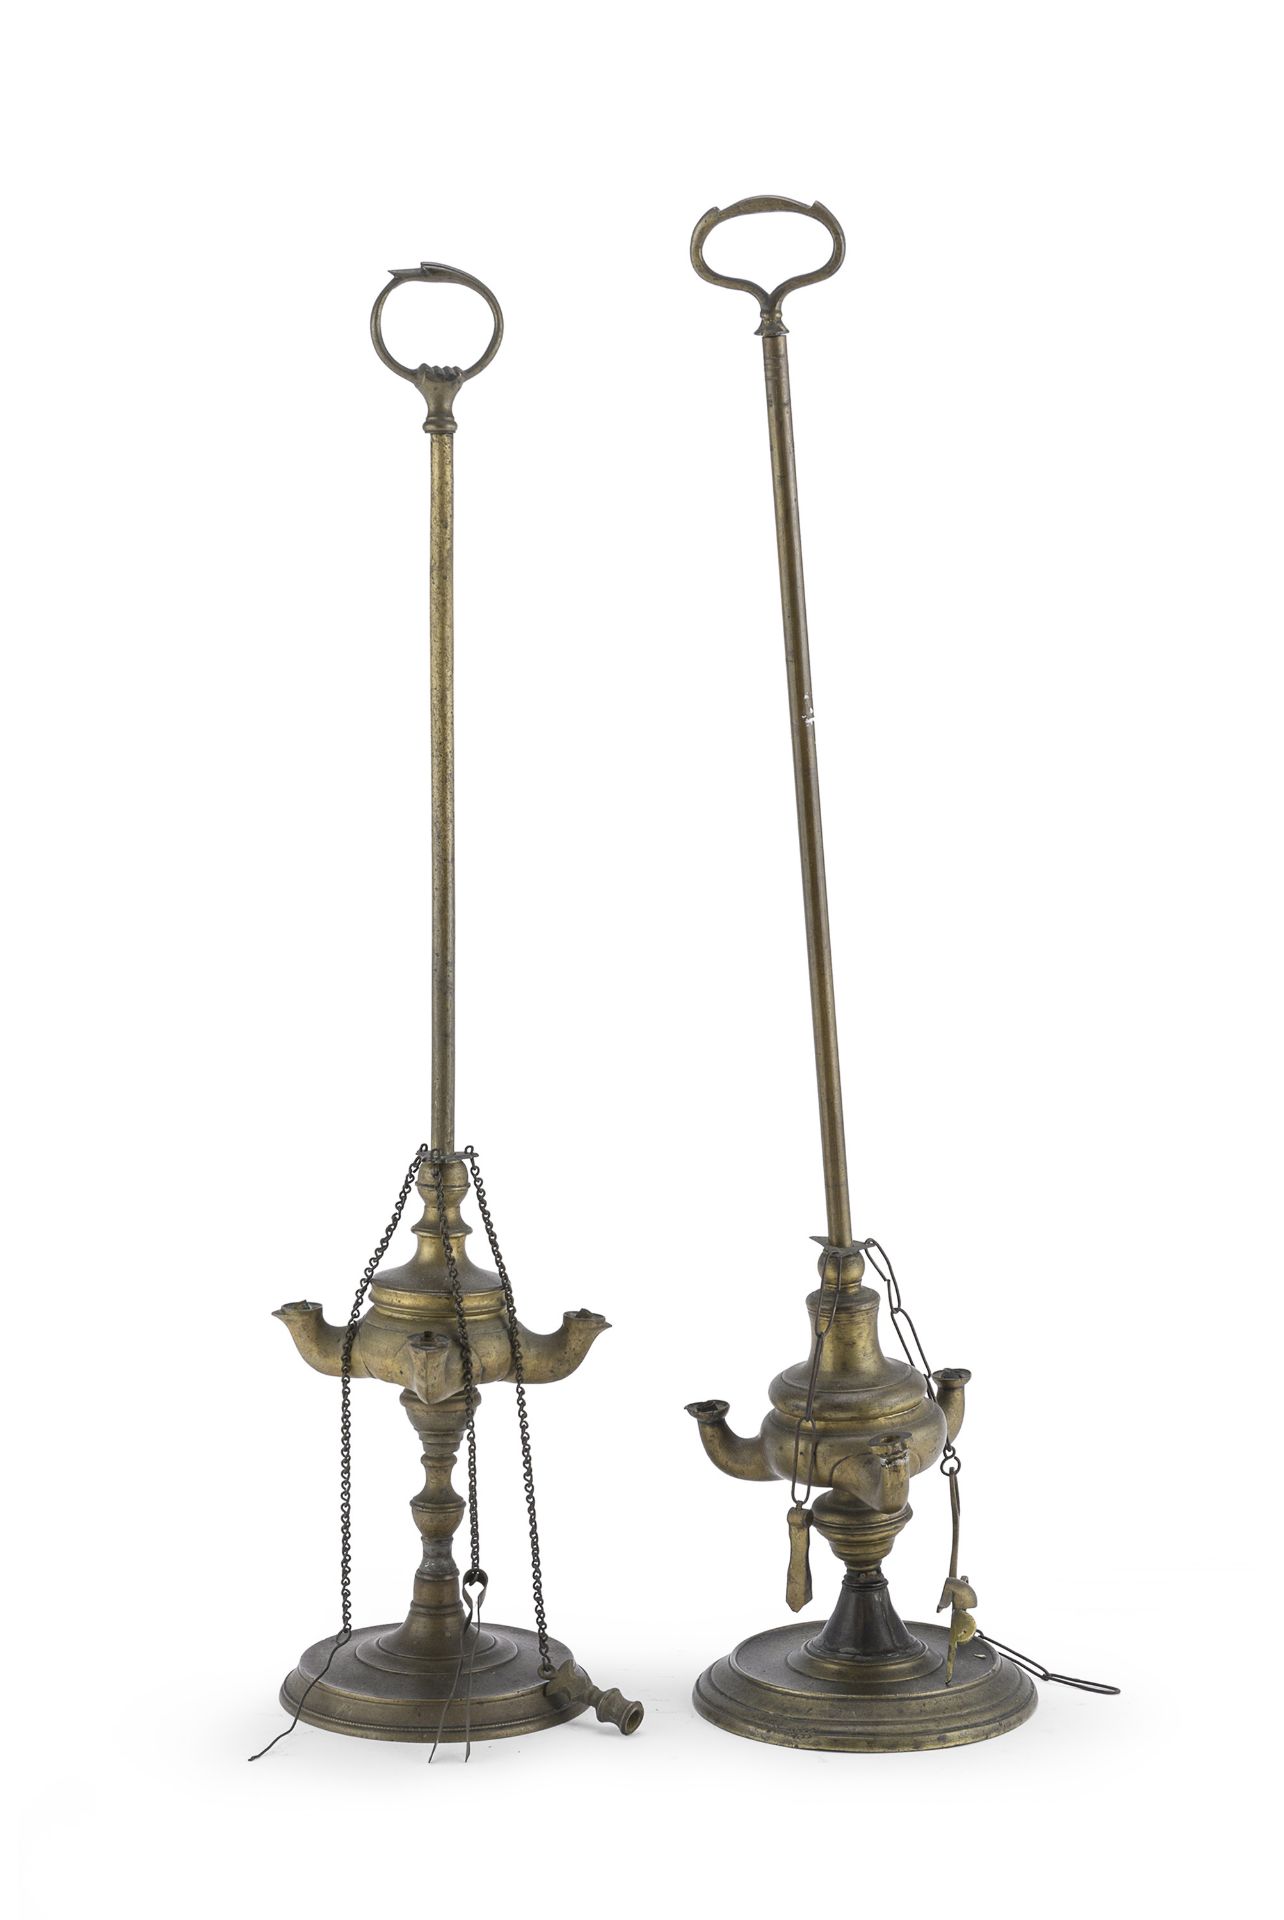 TWO GILT METAL OIL LAMPS 19TH CENTURY